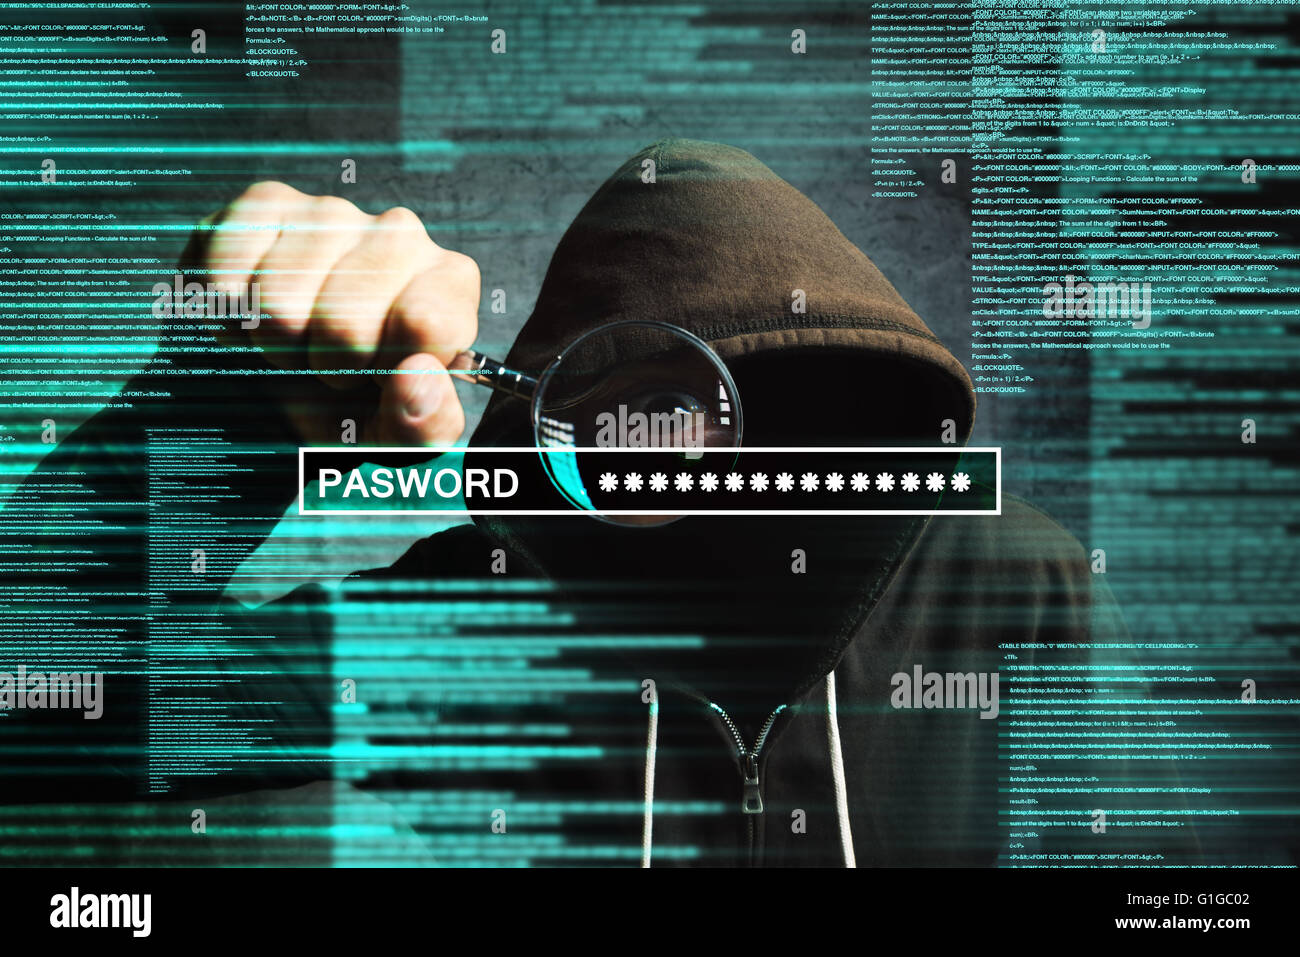 Hooded computer hacker with magnifying glass stealing internet password, online security concept. Stock Photo